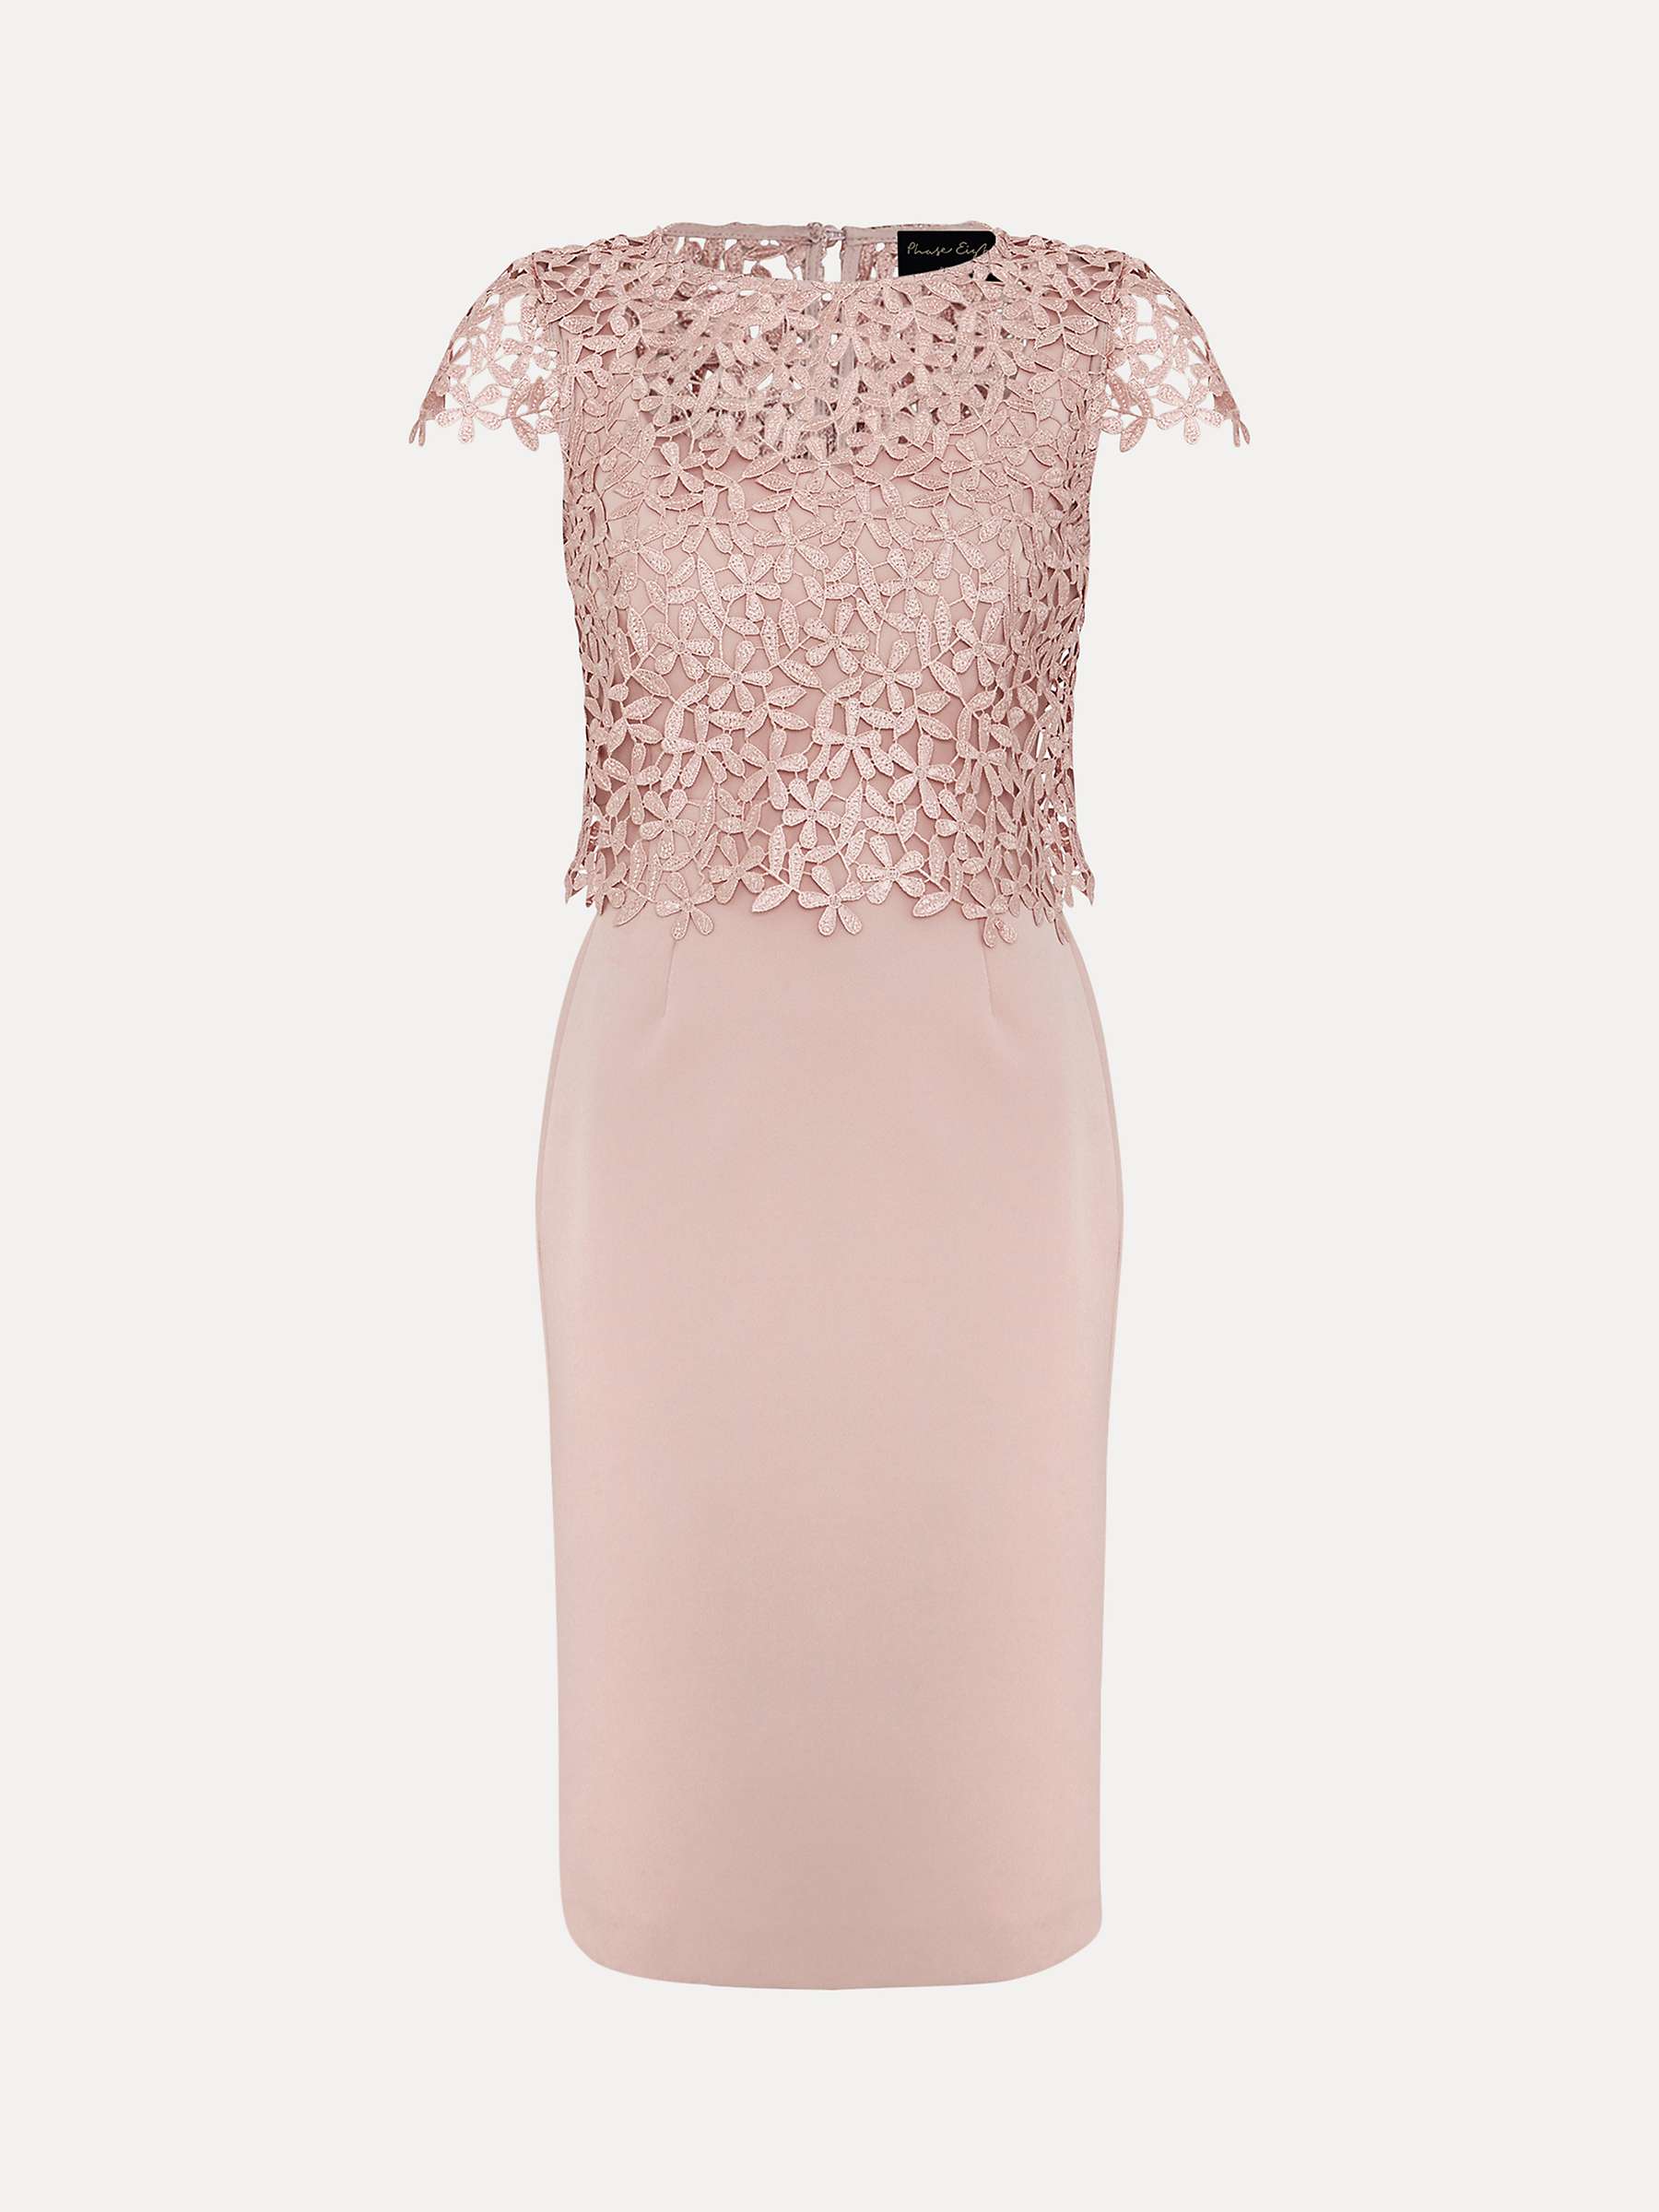 Buy Phase Eight Petite Daisy Textured Bodice Dress Online at johnlewis.com